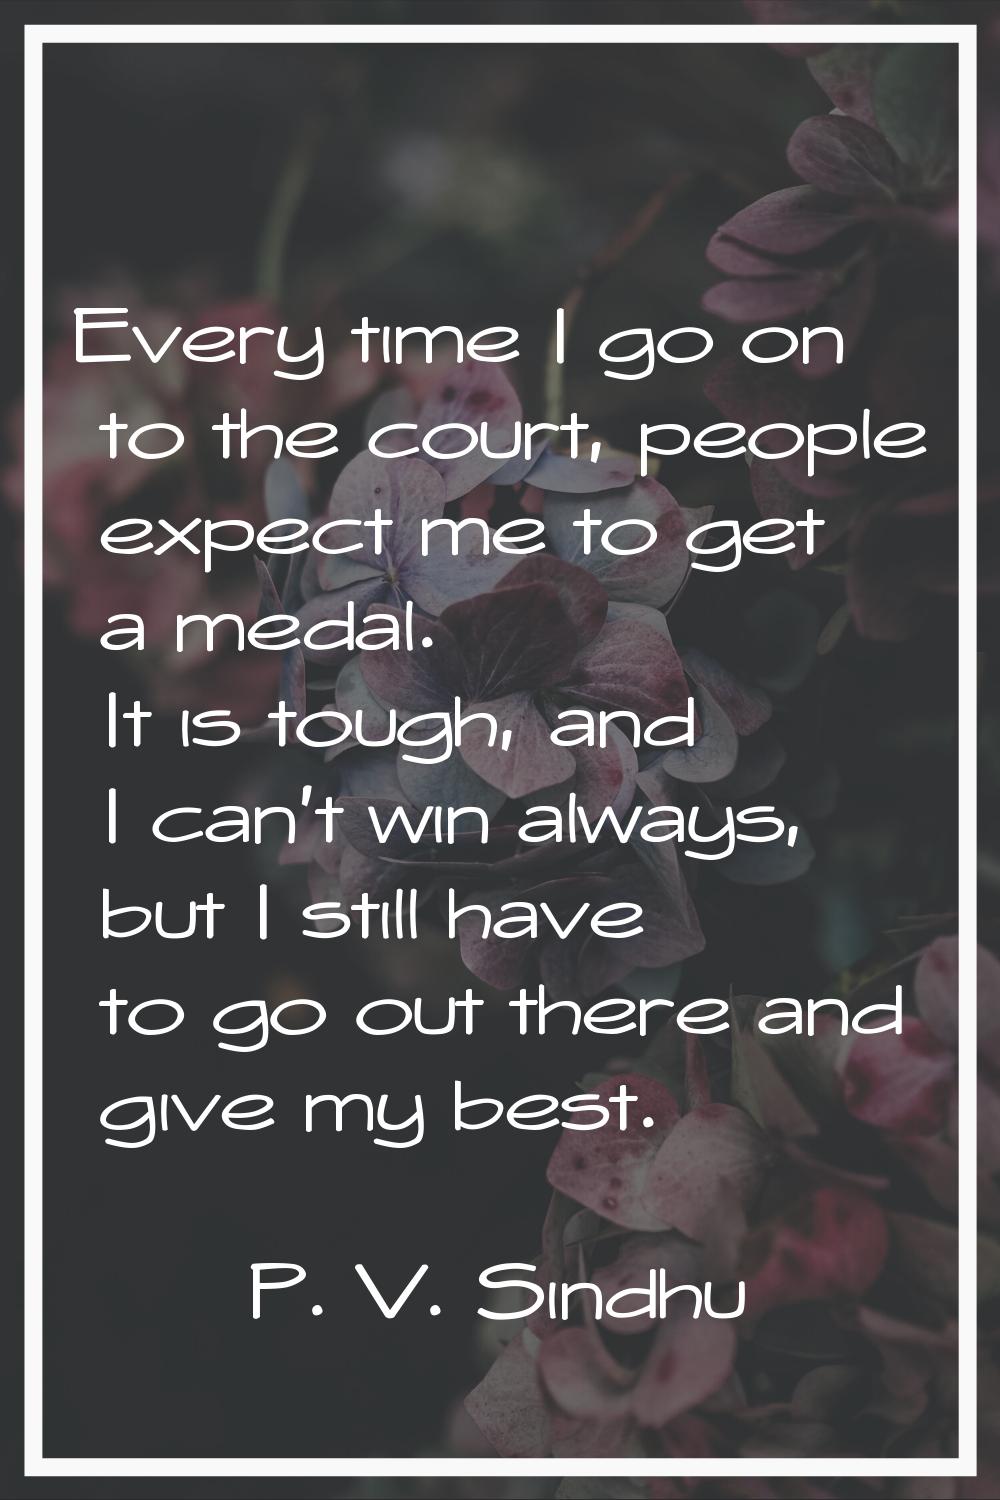 Every time I go on to the court, people expect me to get a medal. It is tough, and I can't win alwa